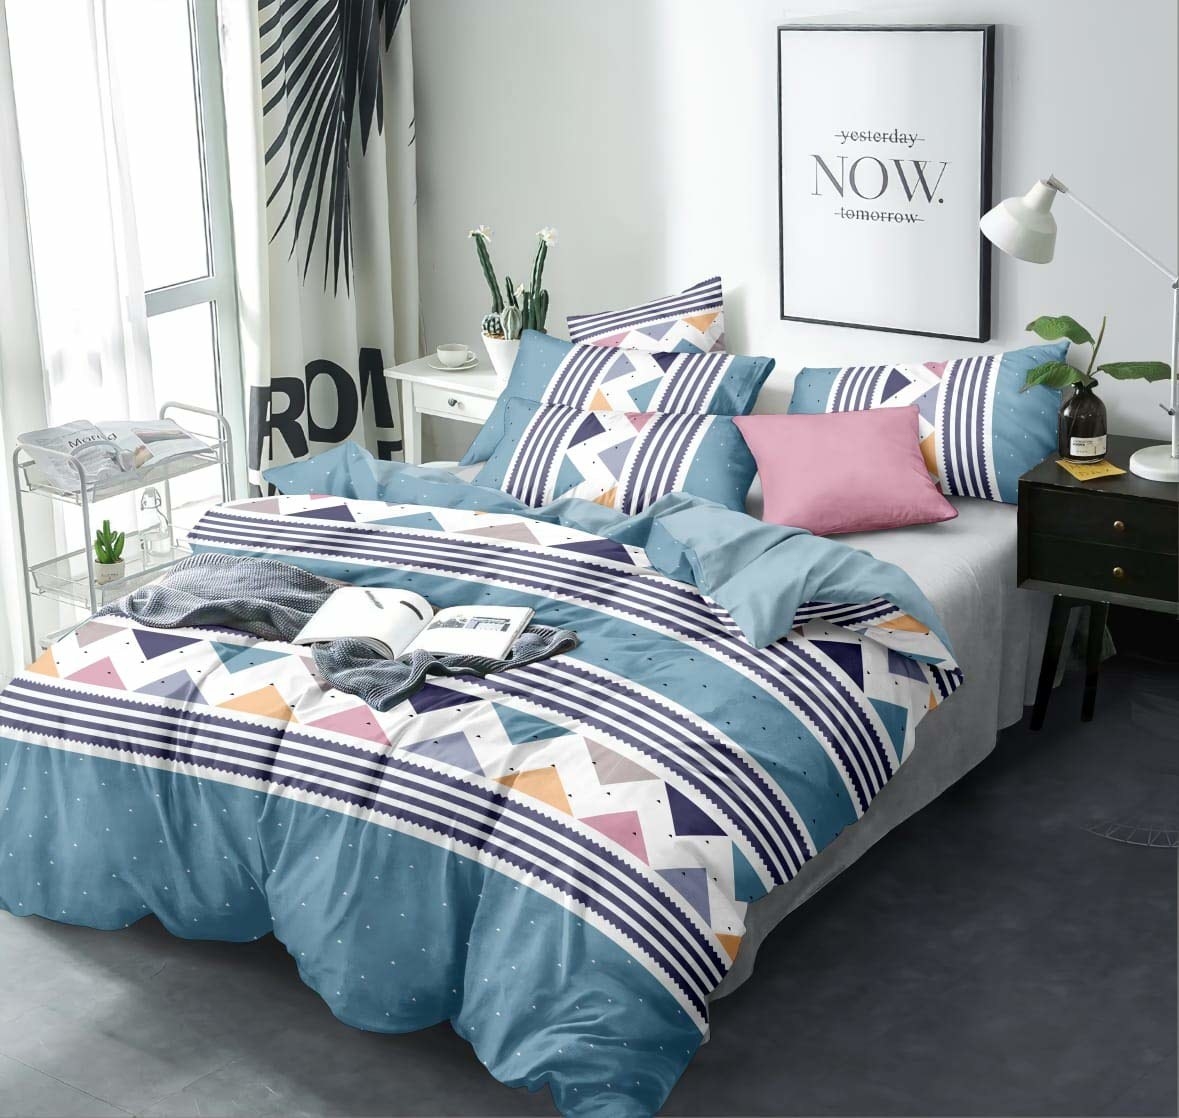 A comforter set on a bed with pillows and books on it